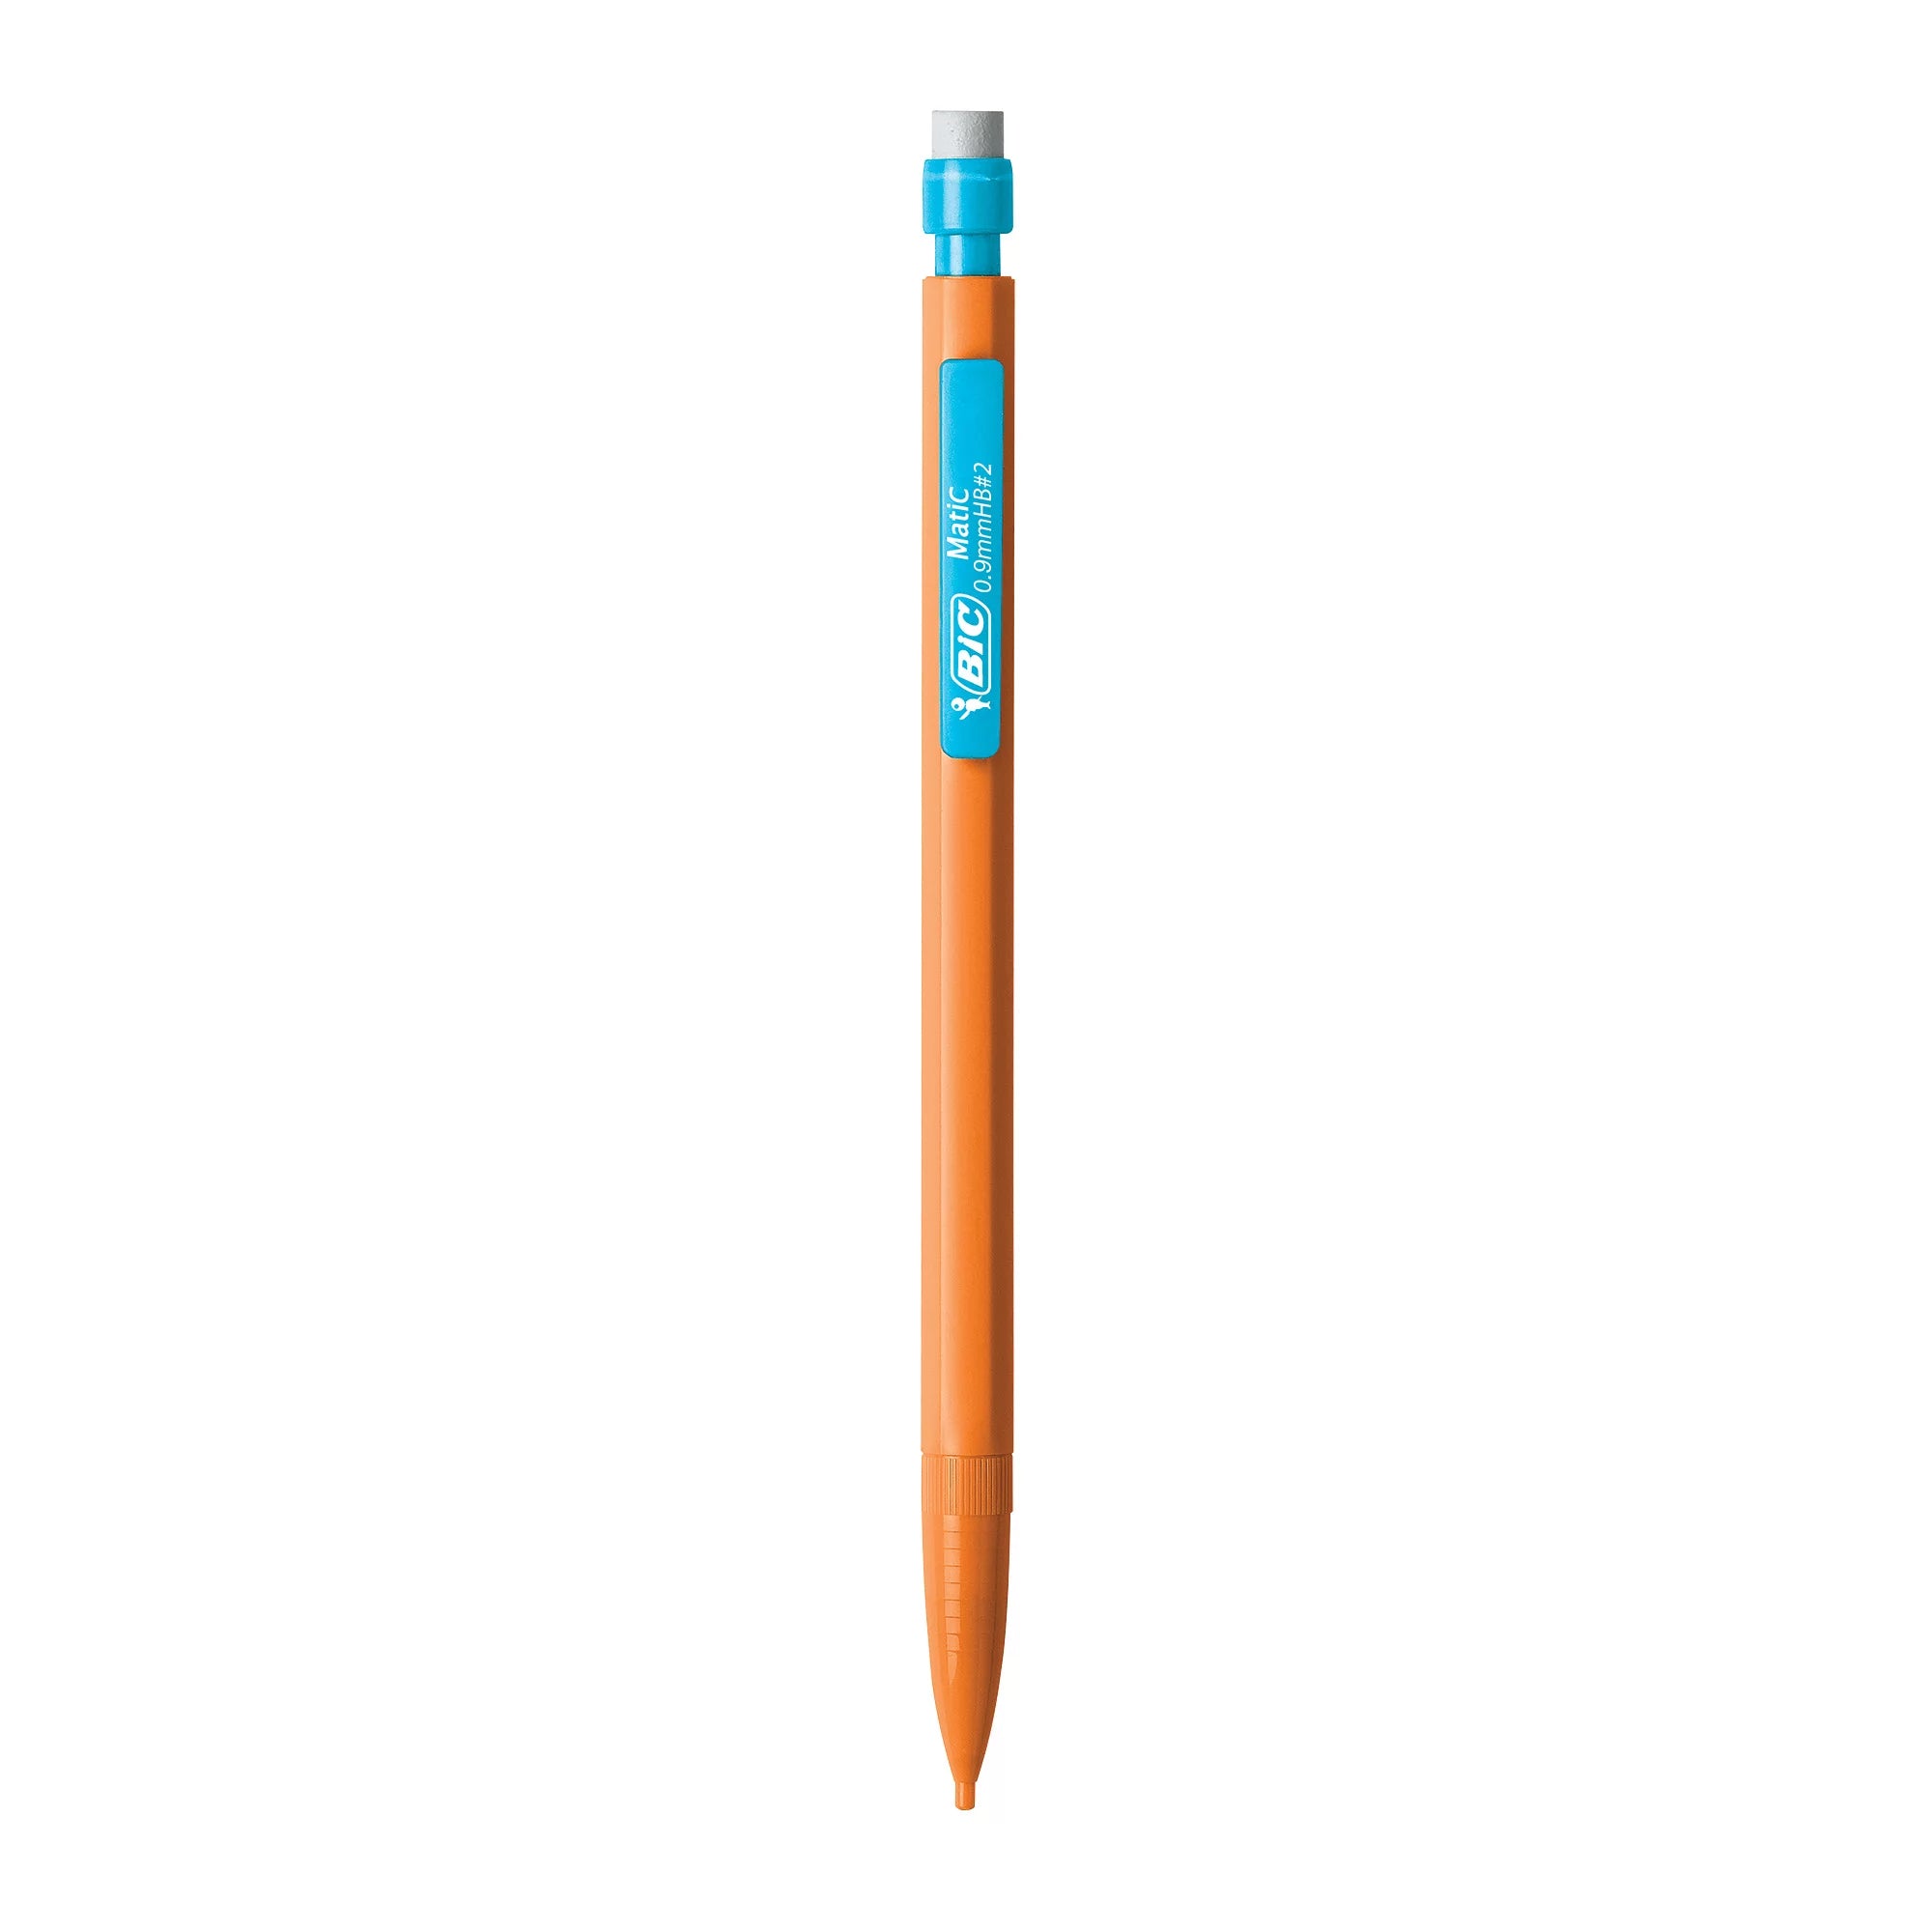 BIC Mechanical Pencil Extra Strong, Mechanical Pencils With Eraser for School or Work - Thick Point (0.9mm)